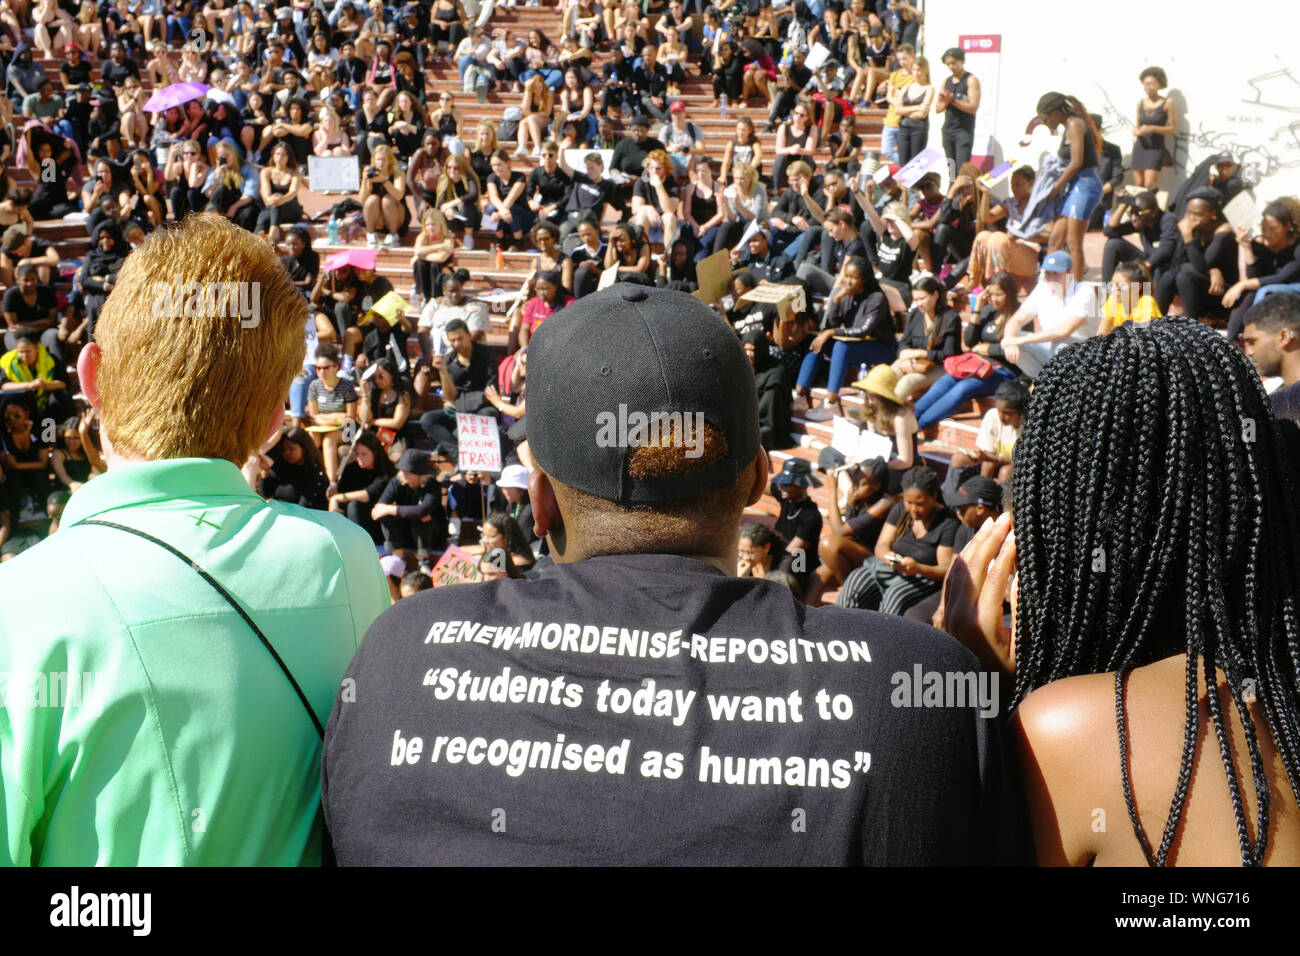 Students from the University of Stellenbosch dressed in black gather to protest against the recent events of gender violence that have rocked South Africa. Several hundred students and staff members held a 2 hour protest at the university demanding action from senior staff members. The protesters come after a series of high profile murders and rapes have shaken South Africa and resulted in calls for action and a national shut down. Stock Photo